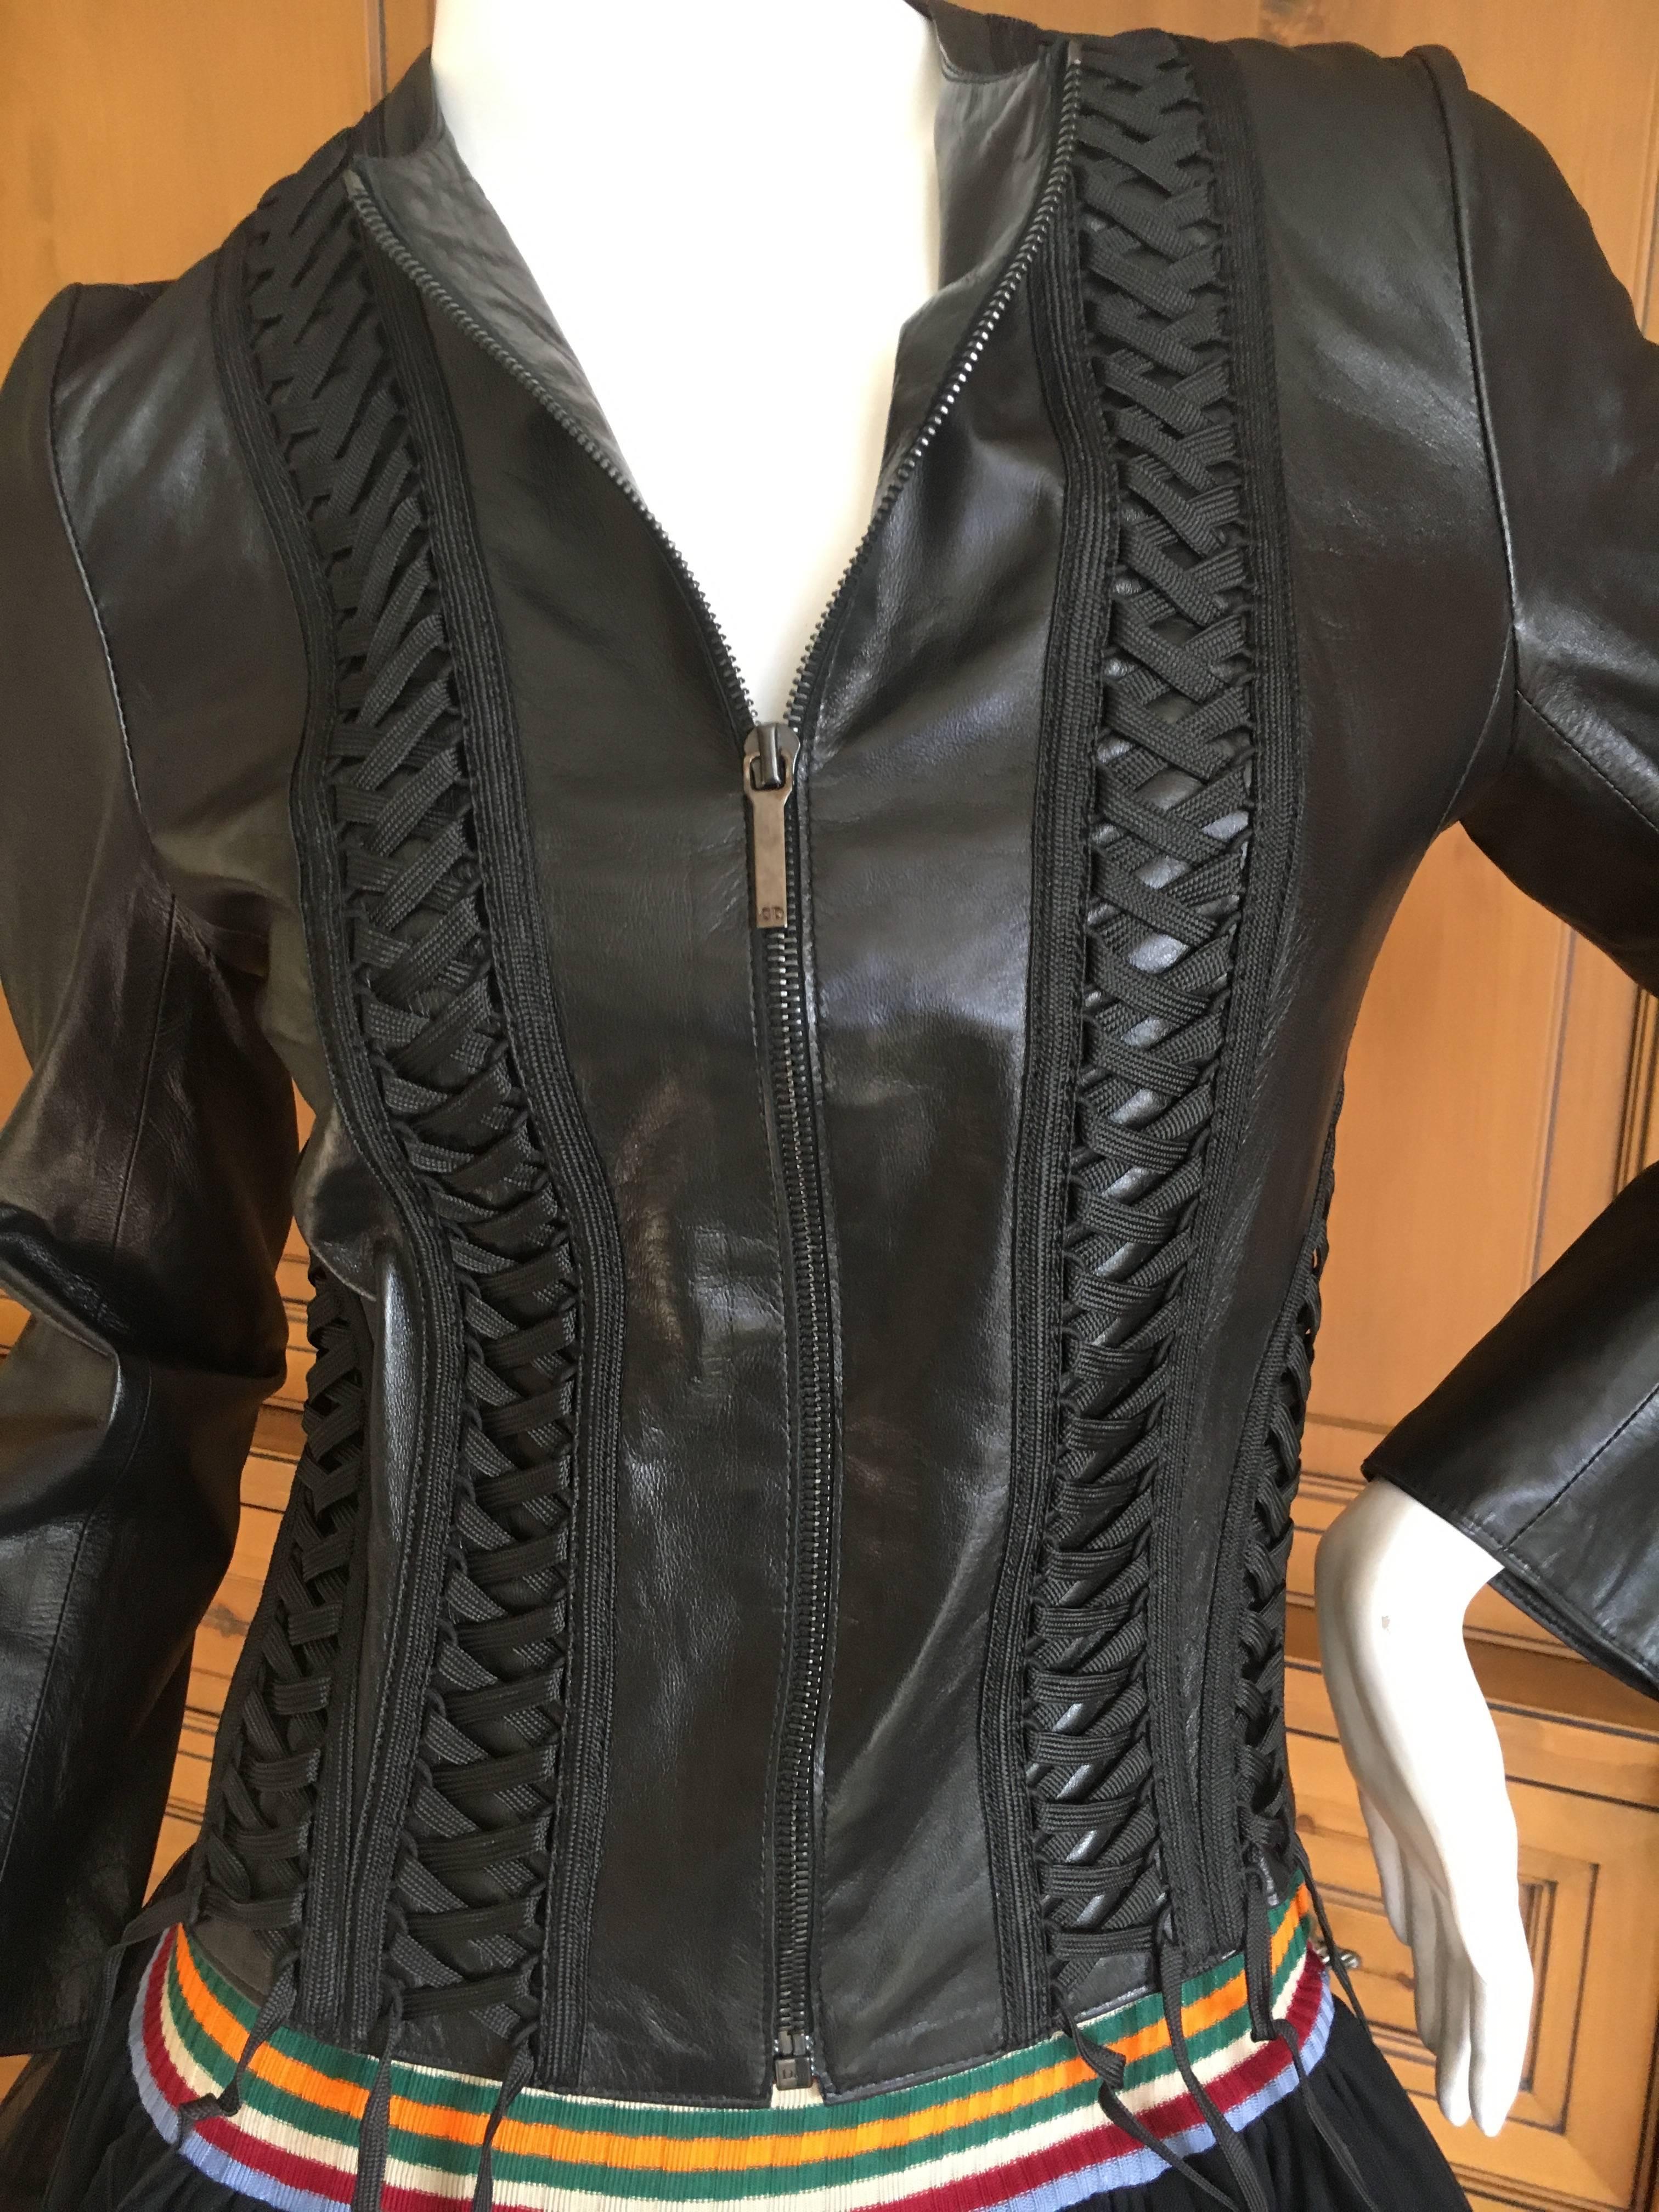 Christian Dior Black Lambskin Leather Corset Laced Bondage Jacket by Galliano For Sale 4